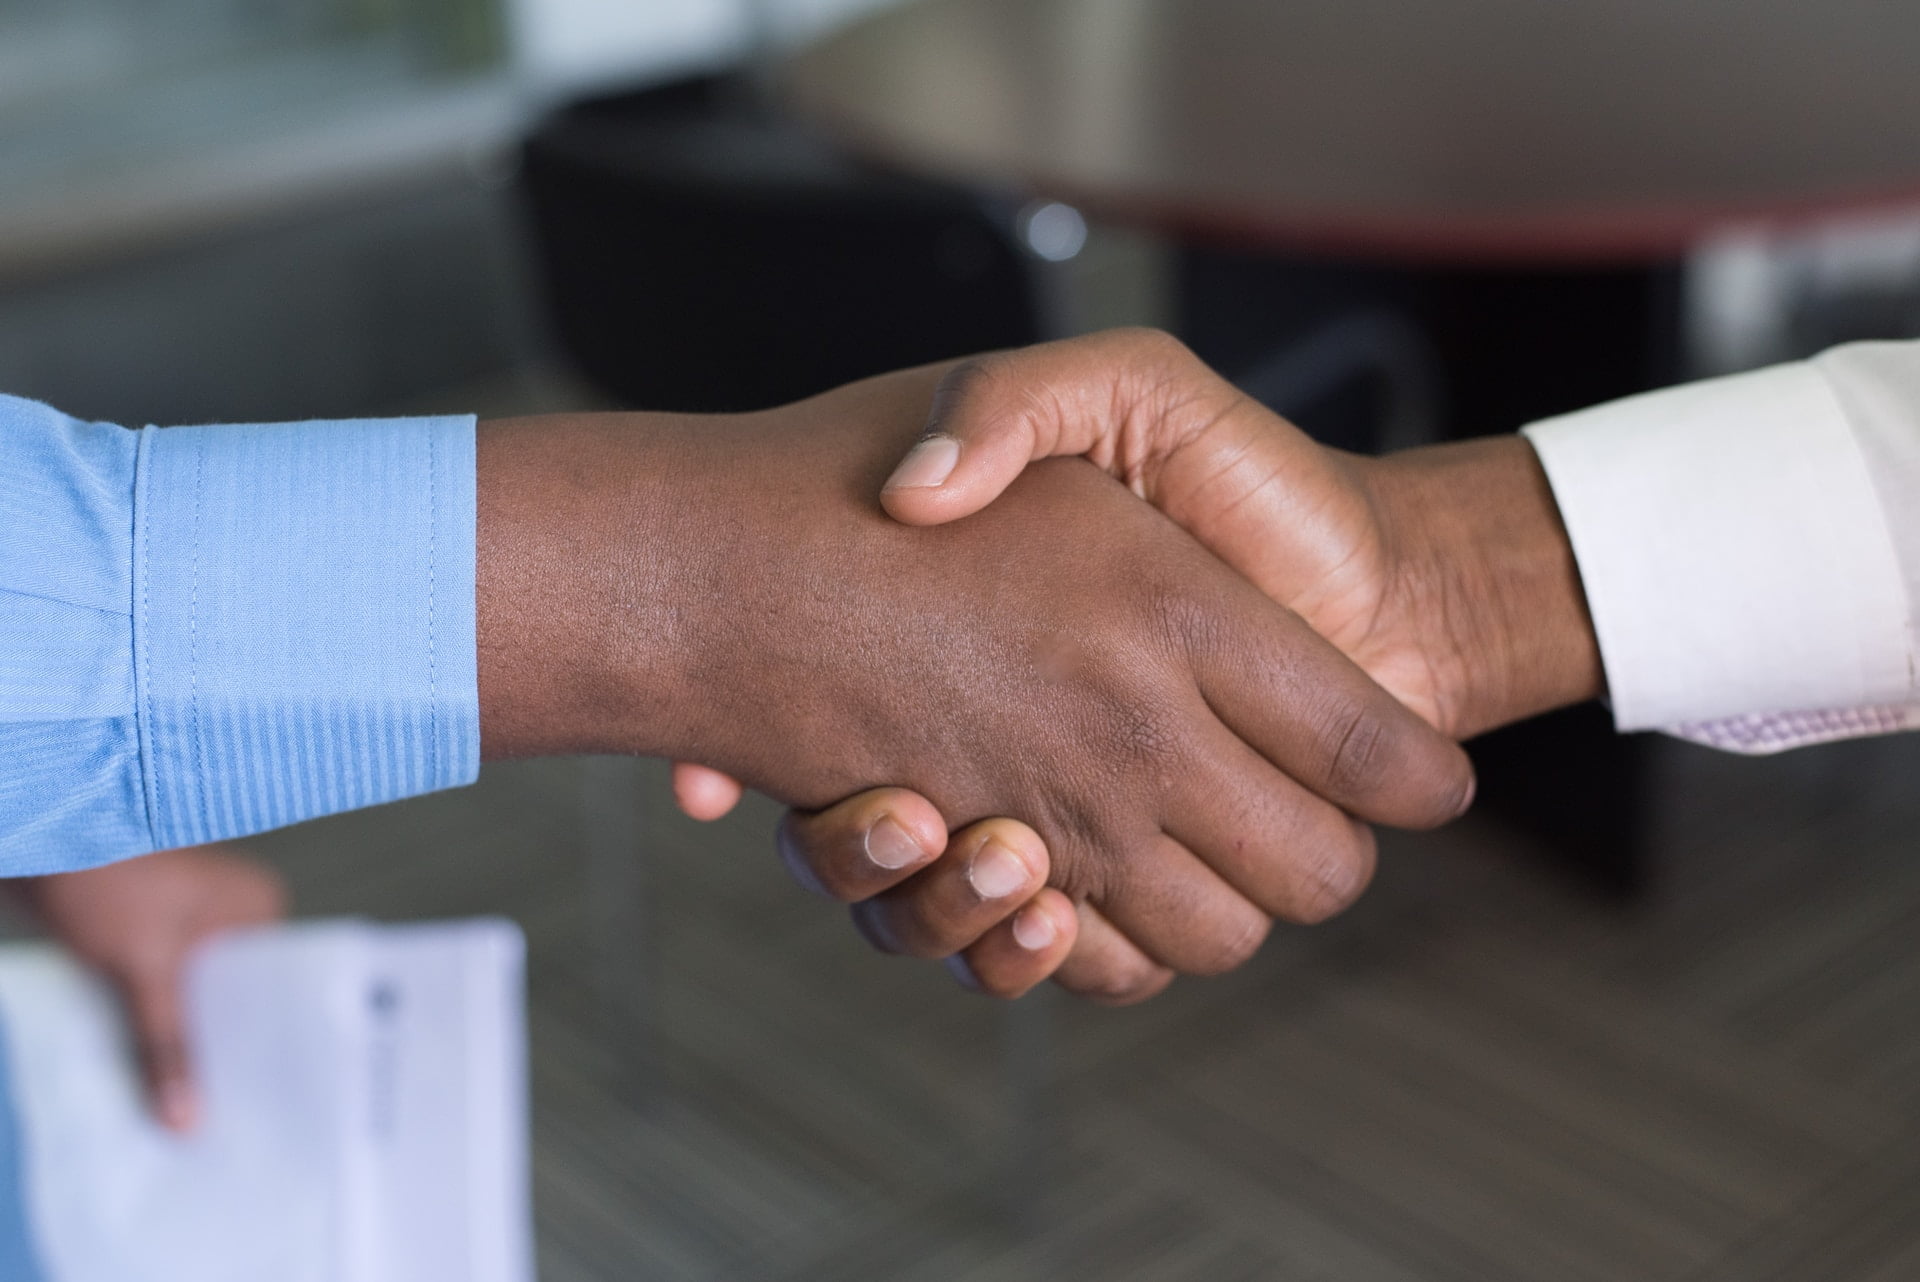 Depicts two people shaking hands in an office setting. Used as a cover image for a news article about StartEngine completing their acquisition of SeedInvest.